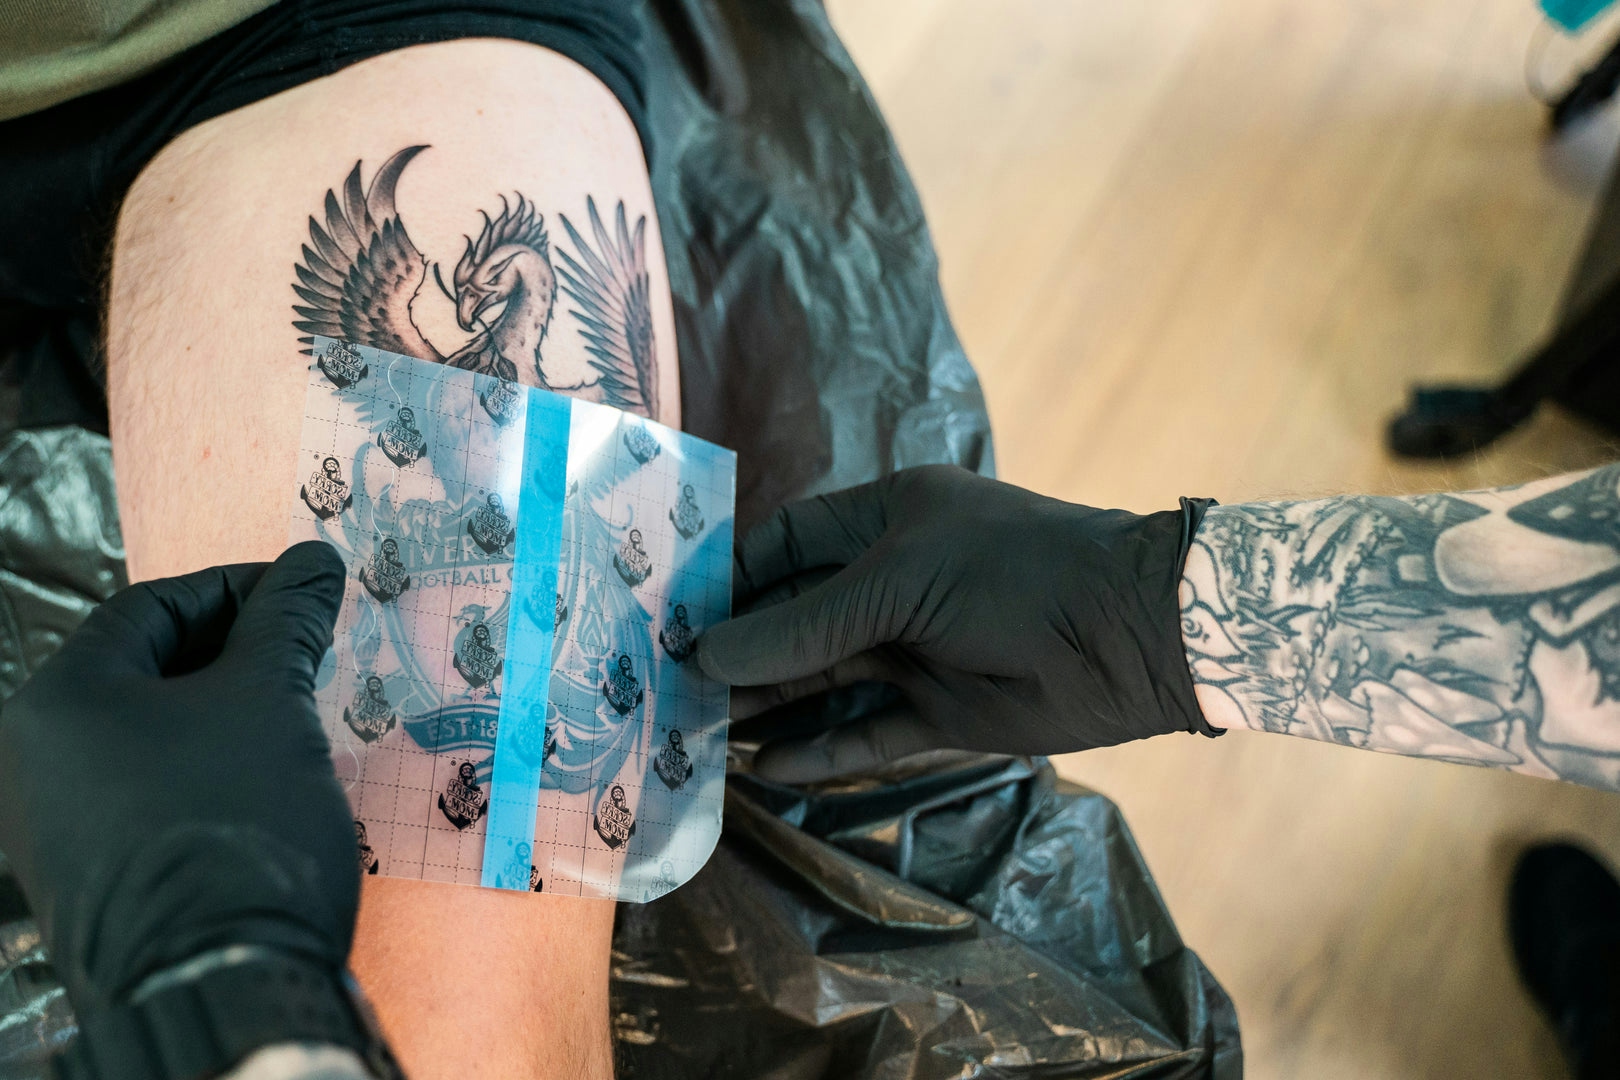 Our tattoo wrapping plastic is fully waterproof, allows you to shower and keeps your active lifestyle intact with zero worries and full protection for your fresh tattoo!